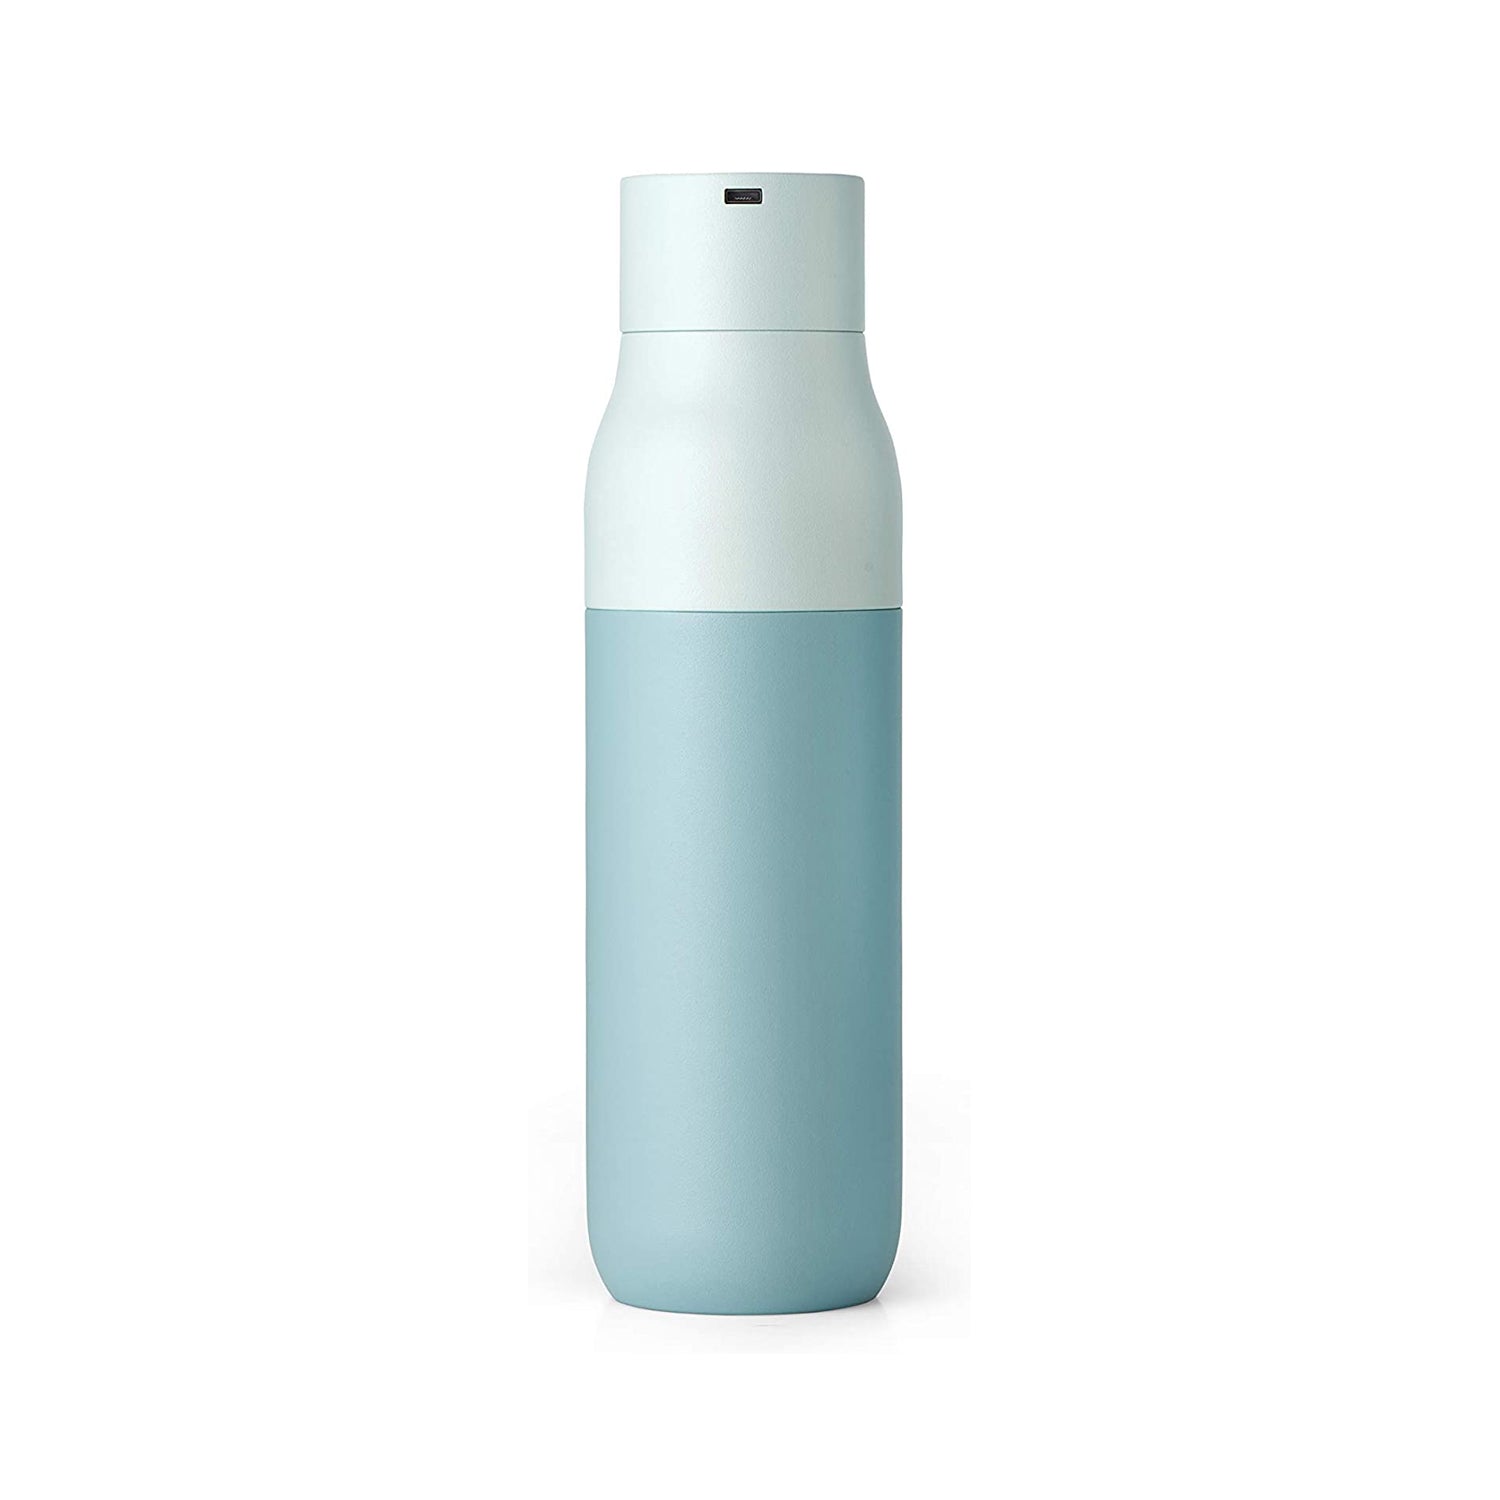 LARQ PureVis Self-Cleaning, Insulated Stainless Steel Water Bottle